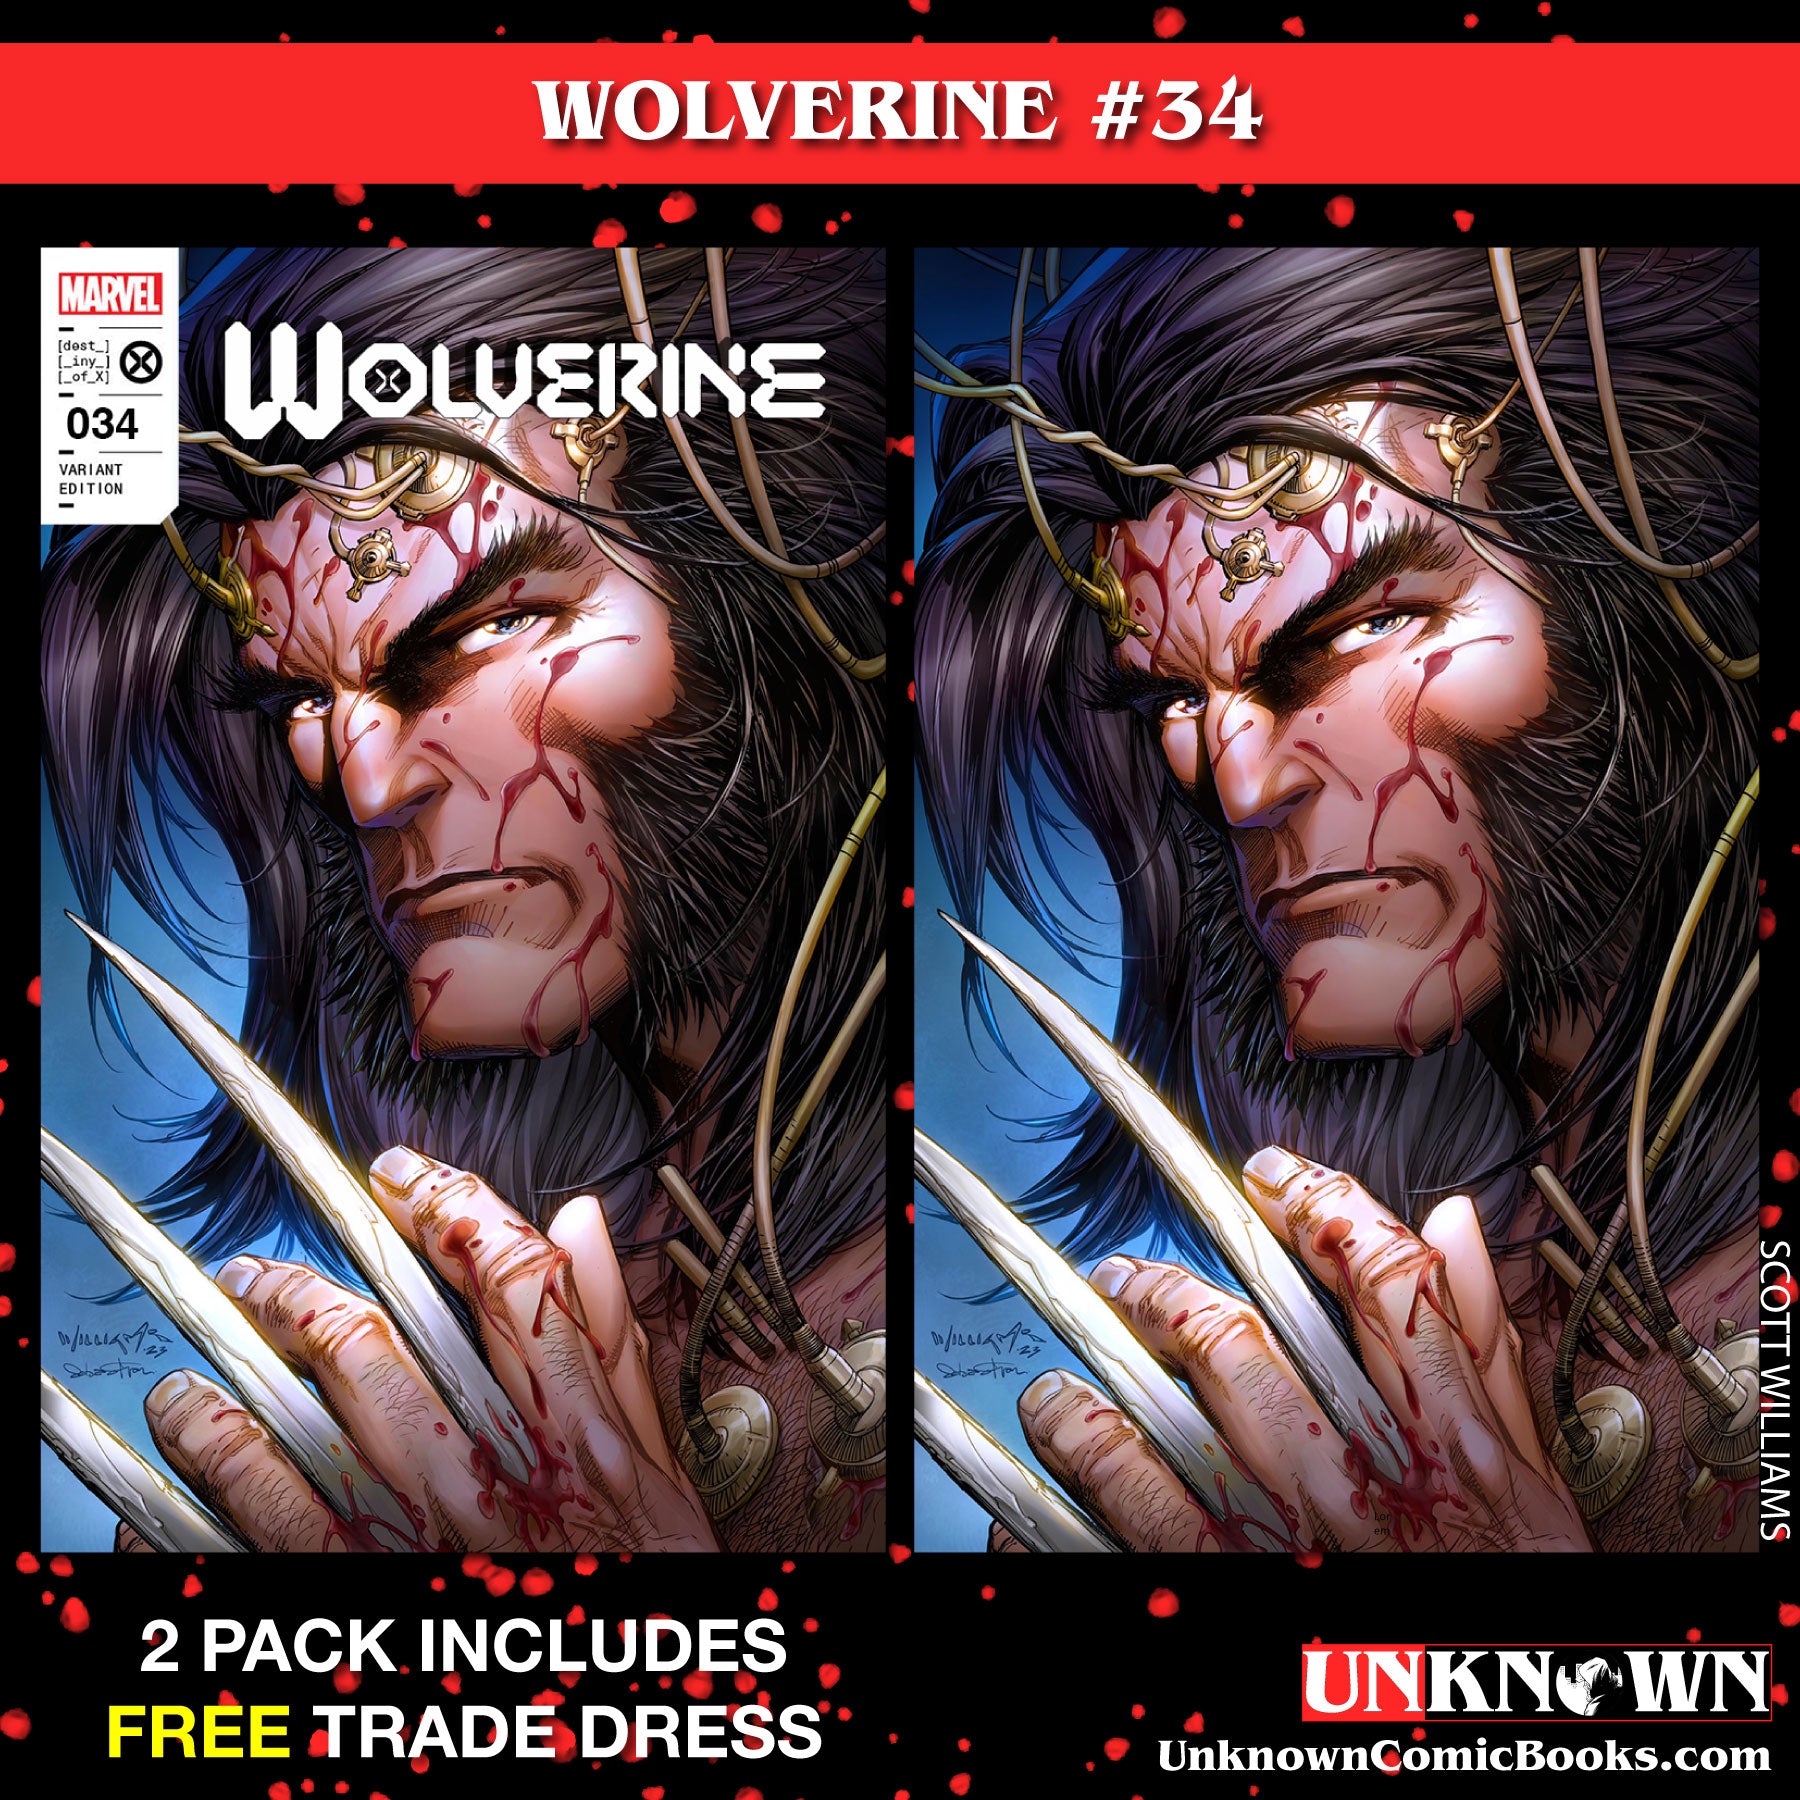 [2 PACK] **FREE TRADE DRESS** WOLVERINE #34 UNKNOWN COMICS SCOTT WILLIAMS EXCLUSIVE ICON VAR (06/14/2023)